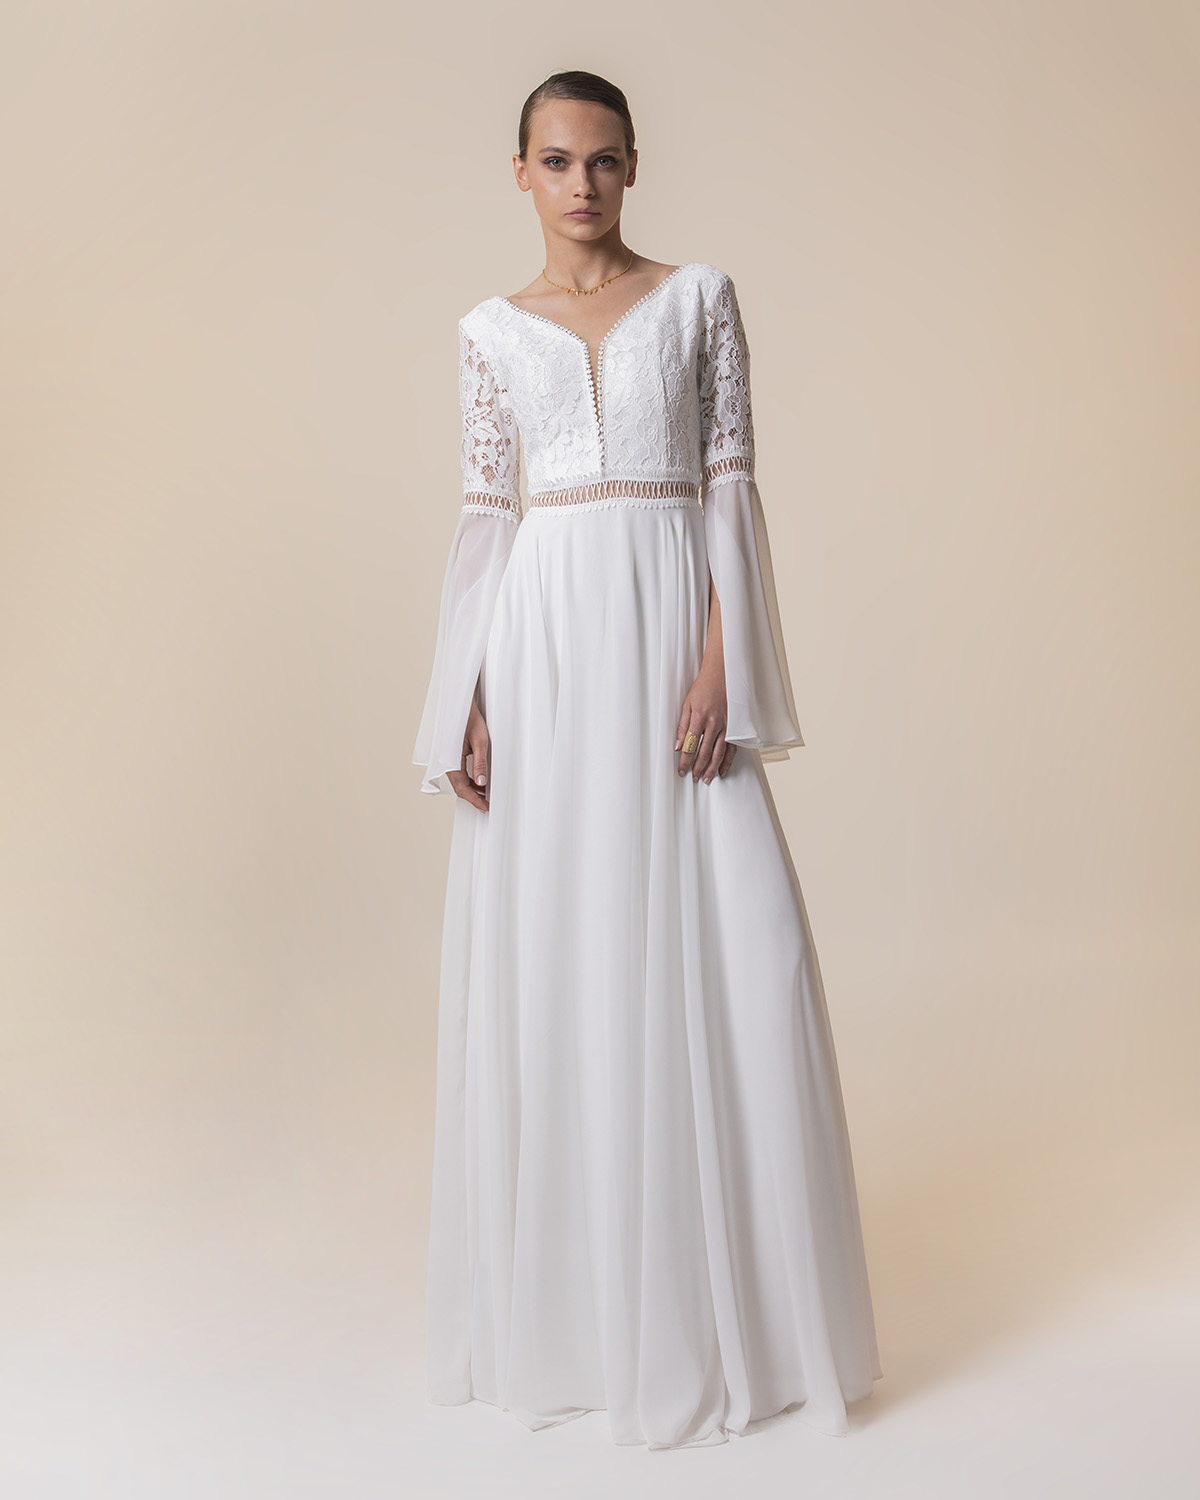 Long wedding dress with long sleeves and lace on the top